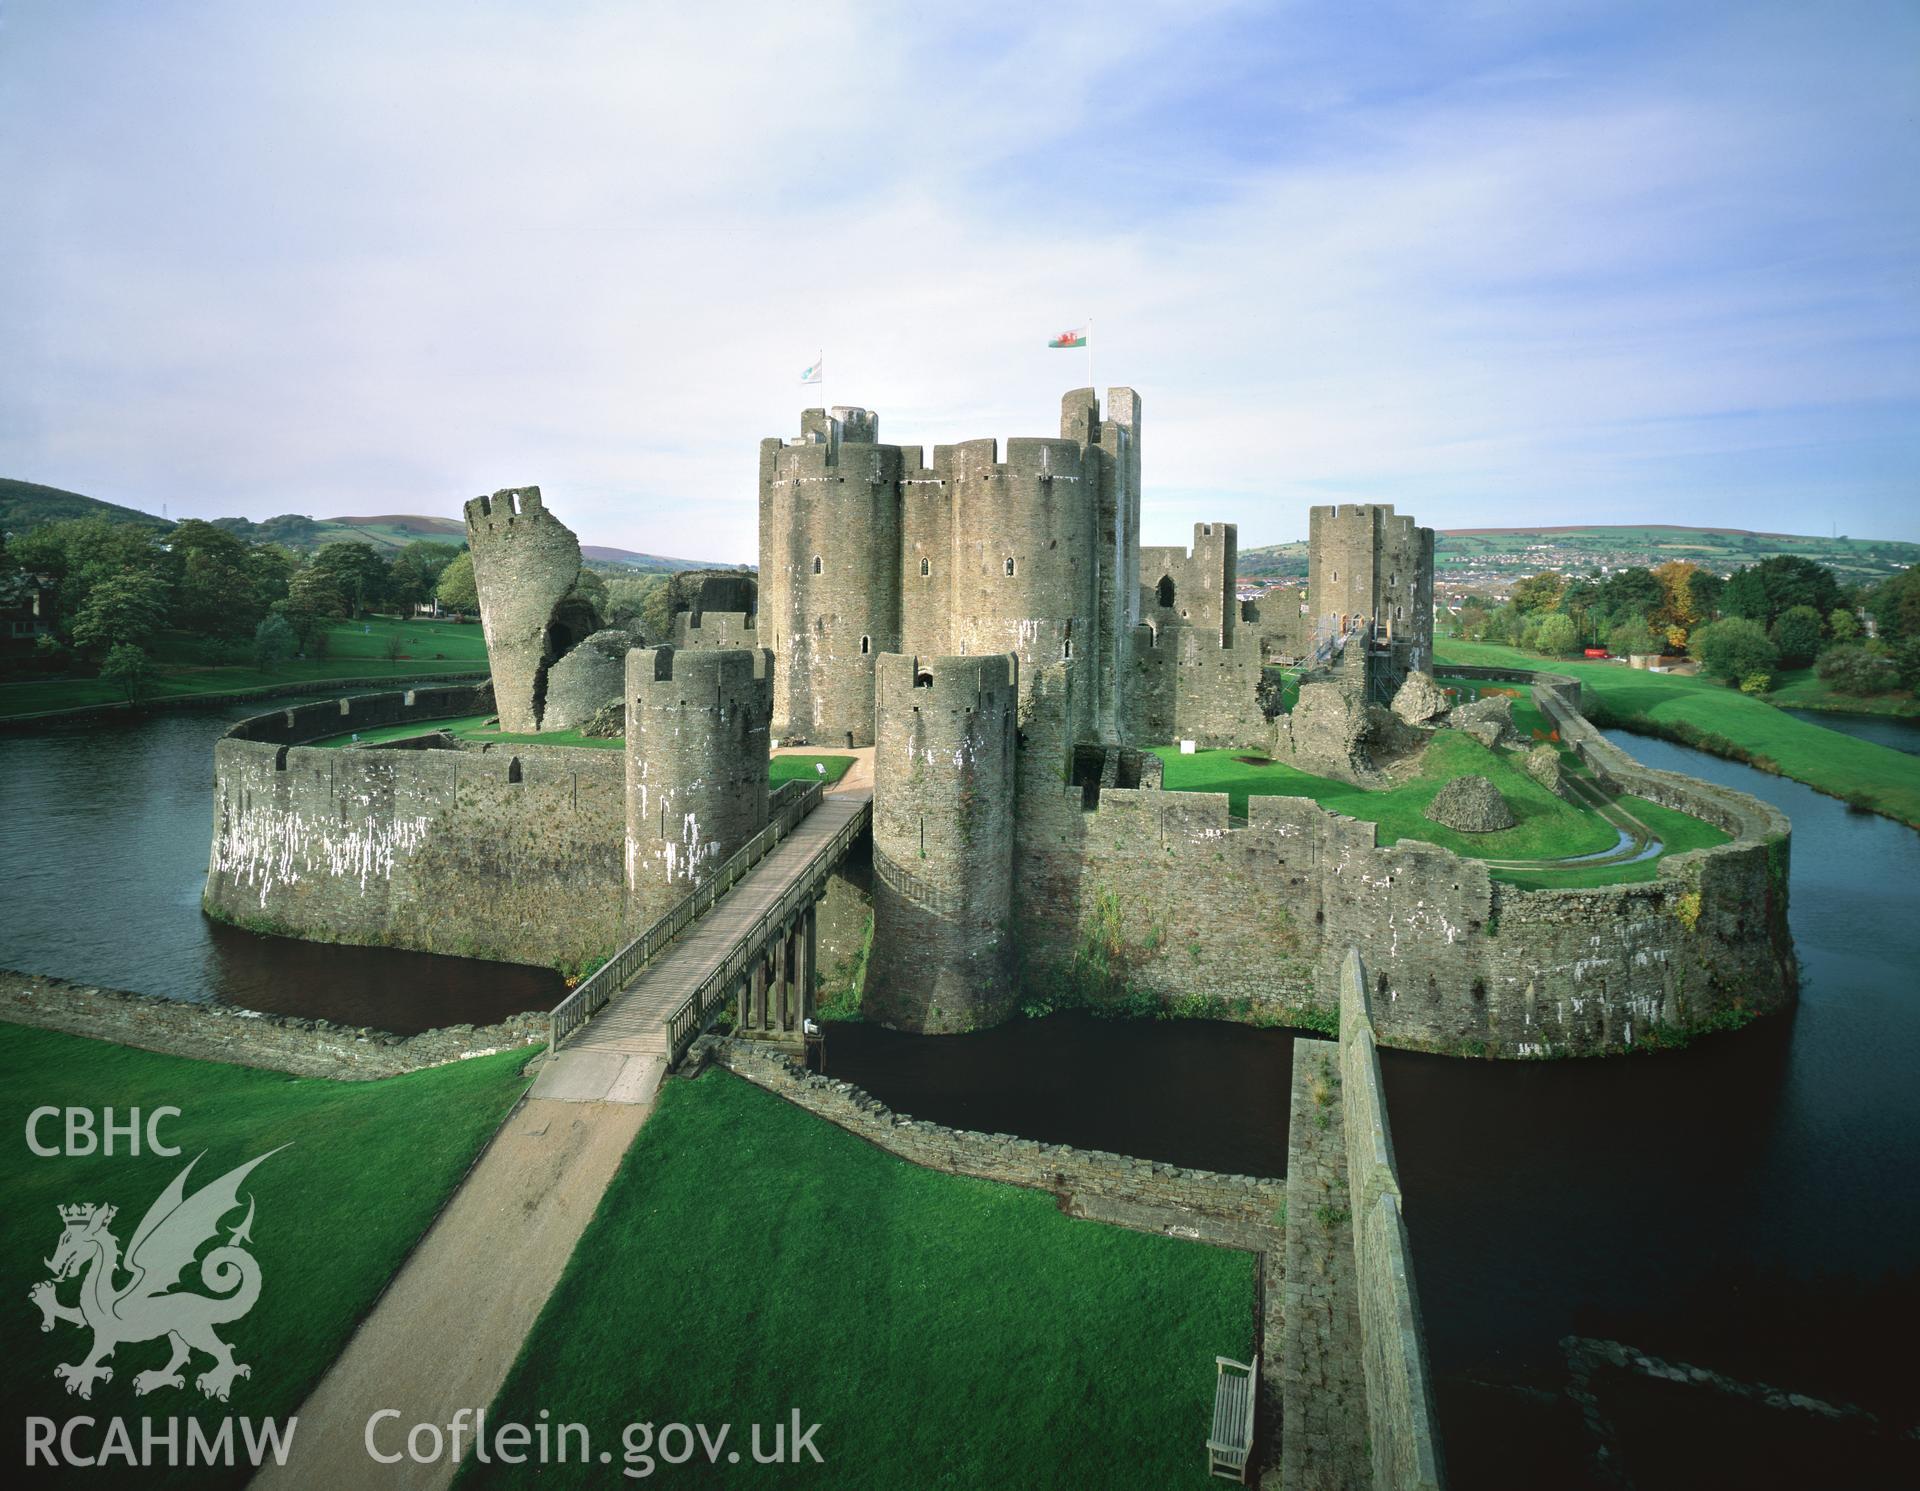 Colour transparency showing view of Caerphilly Castle